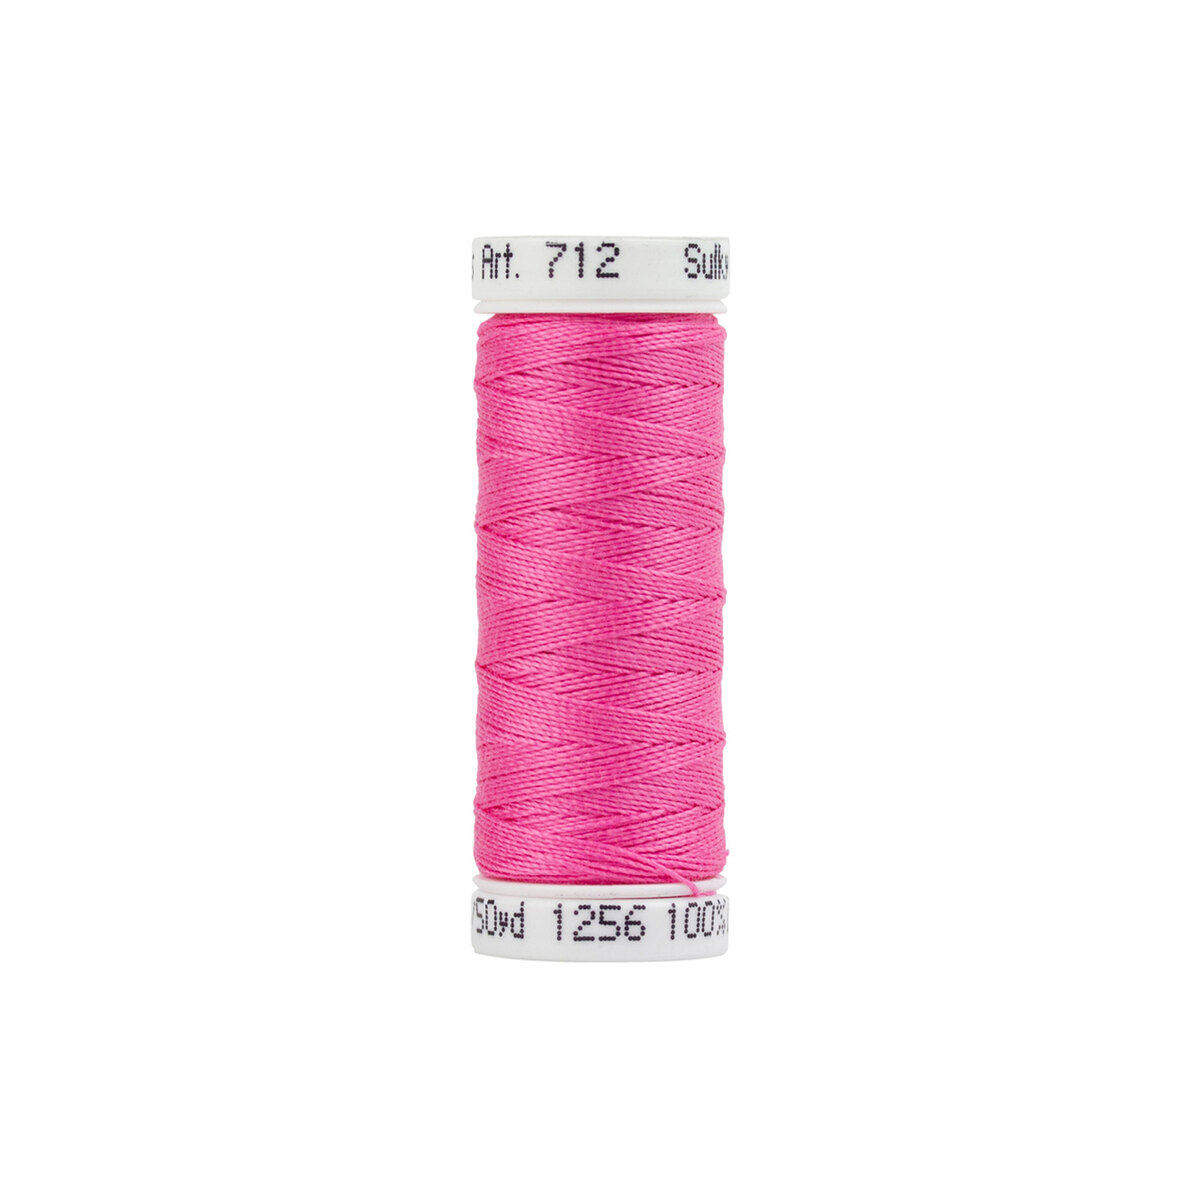 Sulky 12 wt Cotton Thread #1256 Sweet Pink - 50 yds